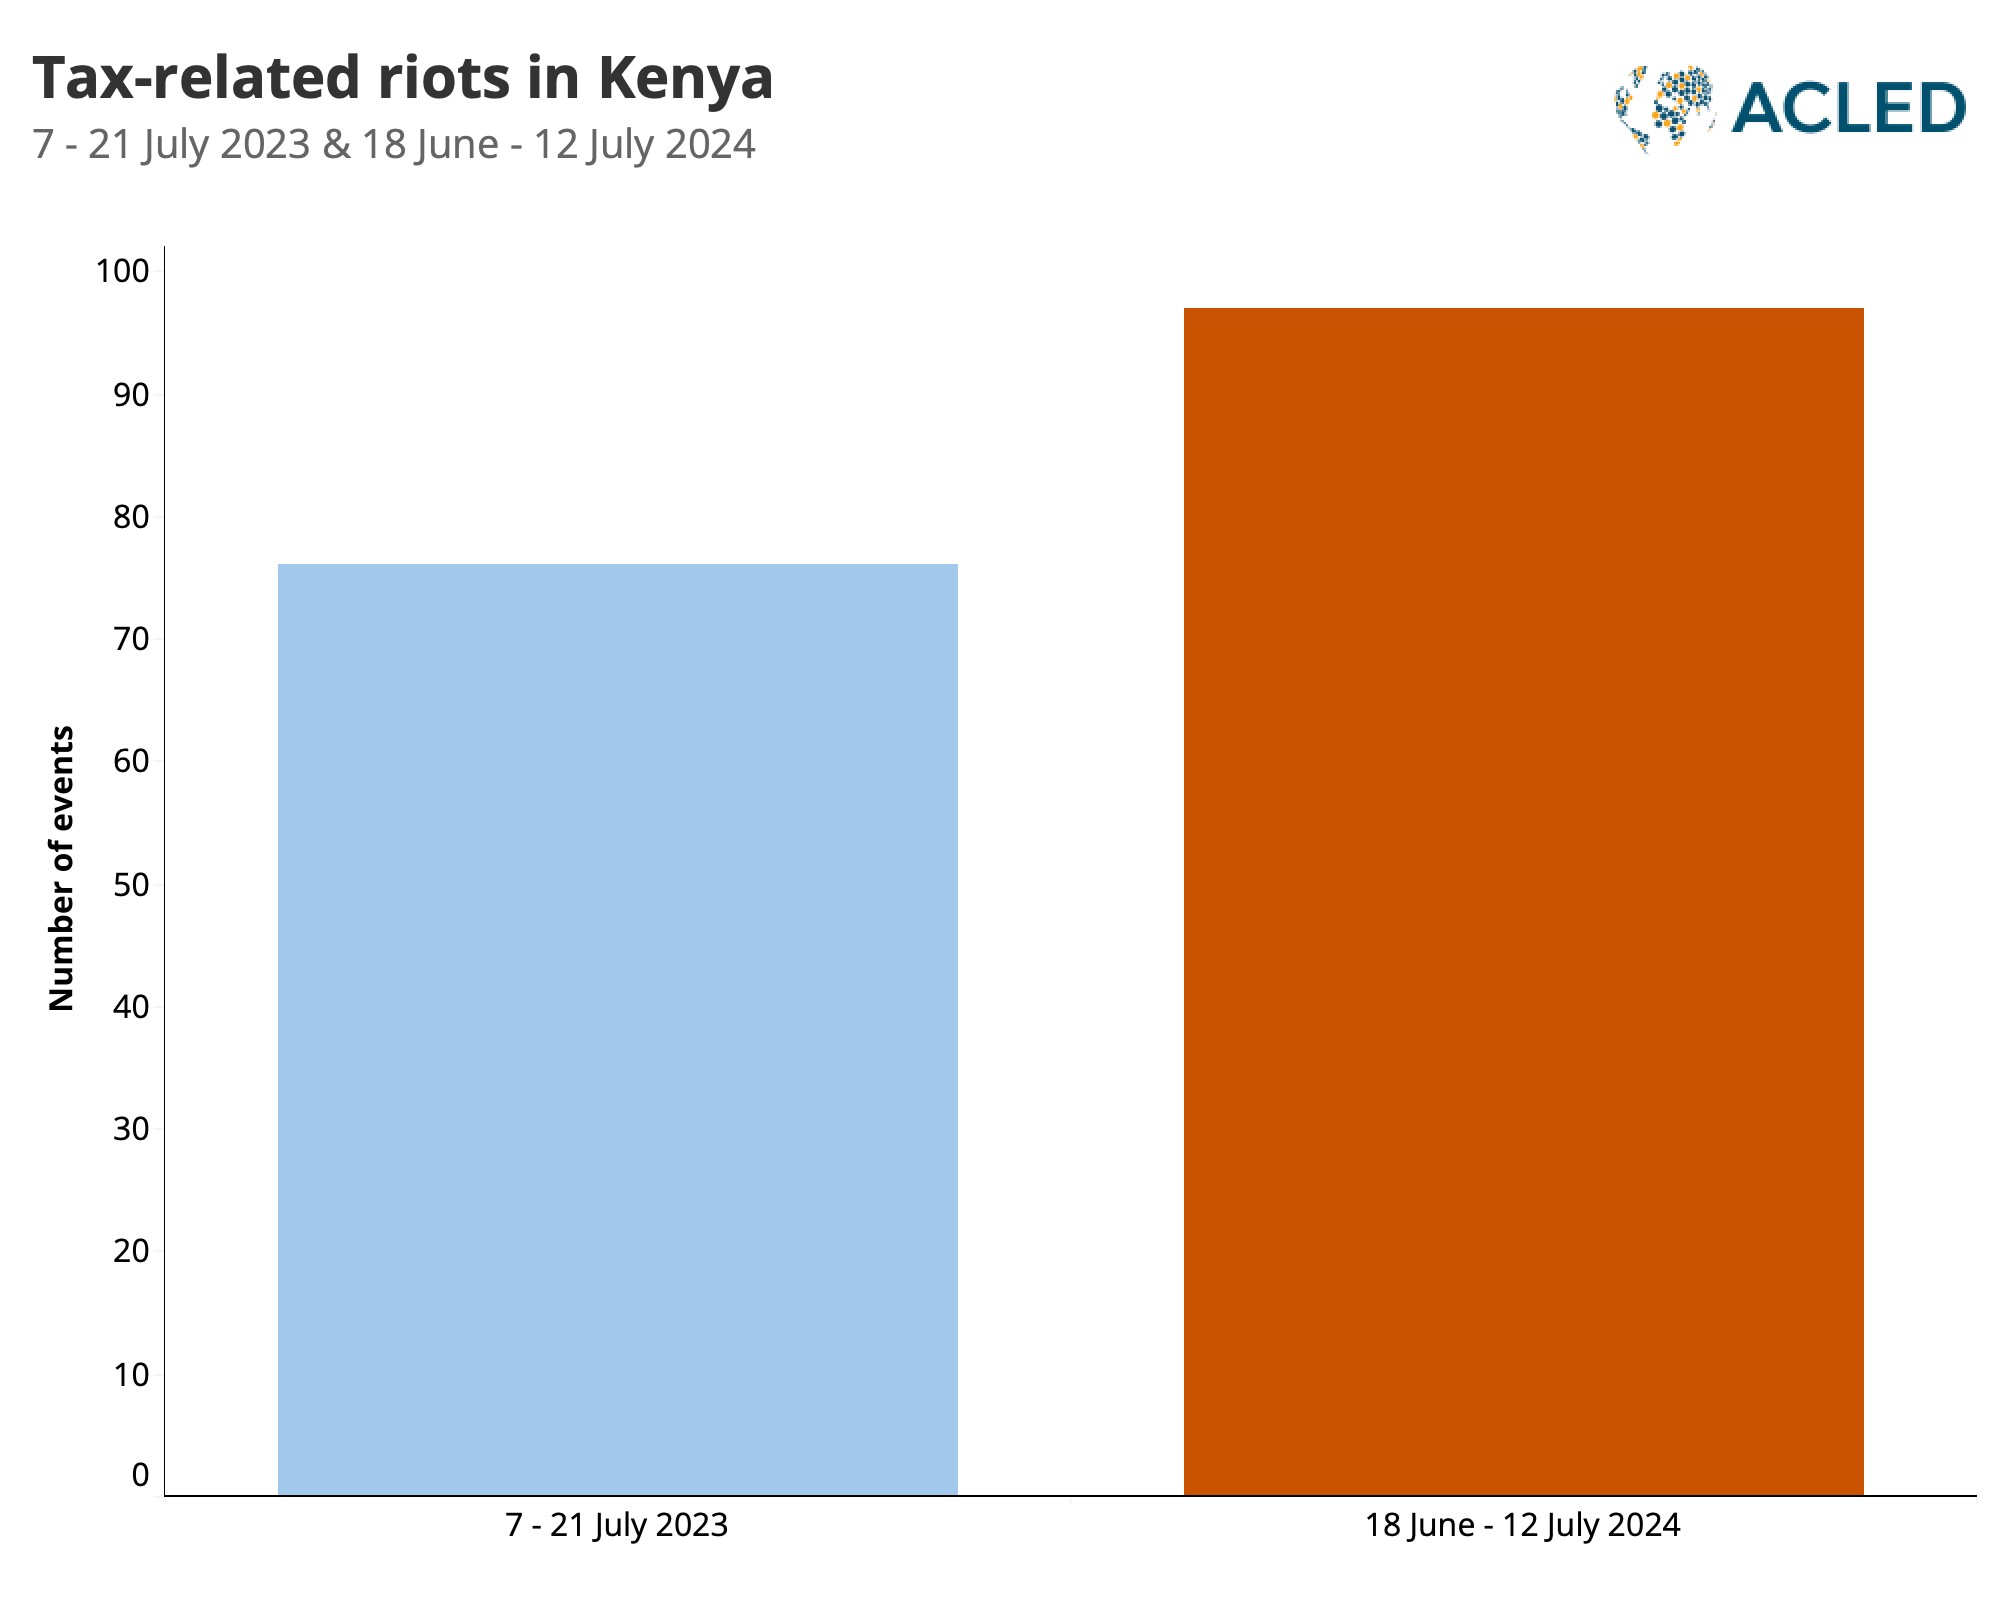 Bar graph: Tax-Related riots in Kenya - July 2023 / July 2024